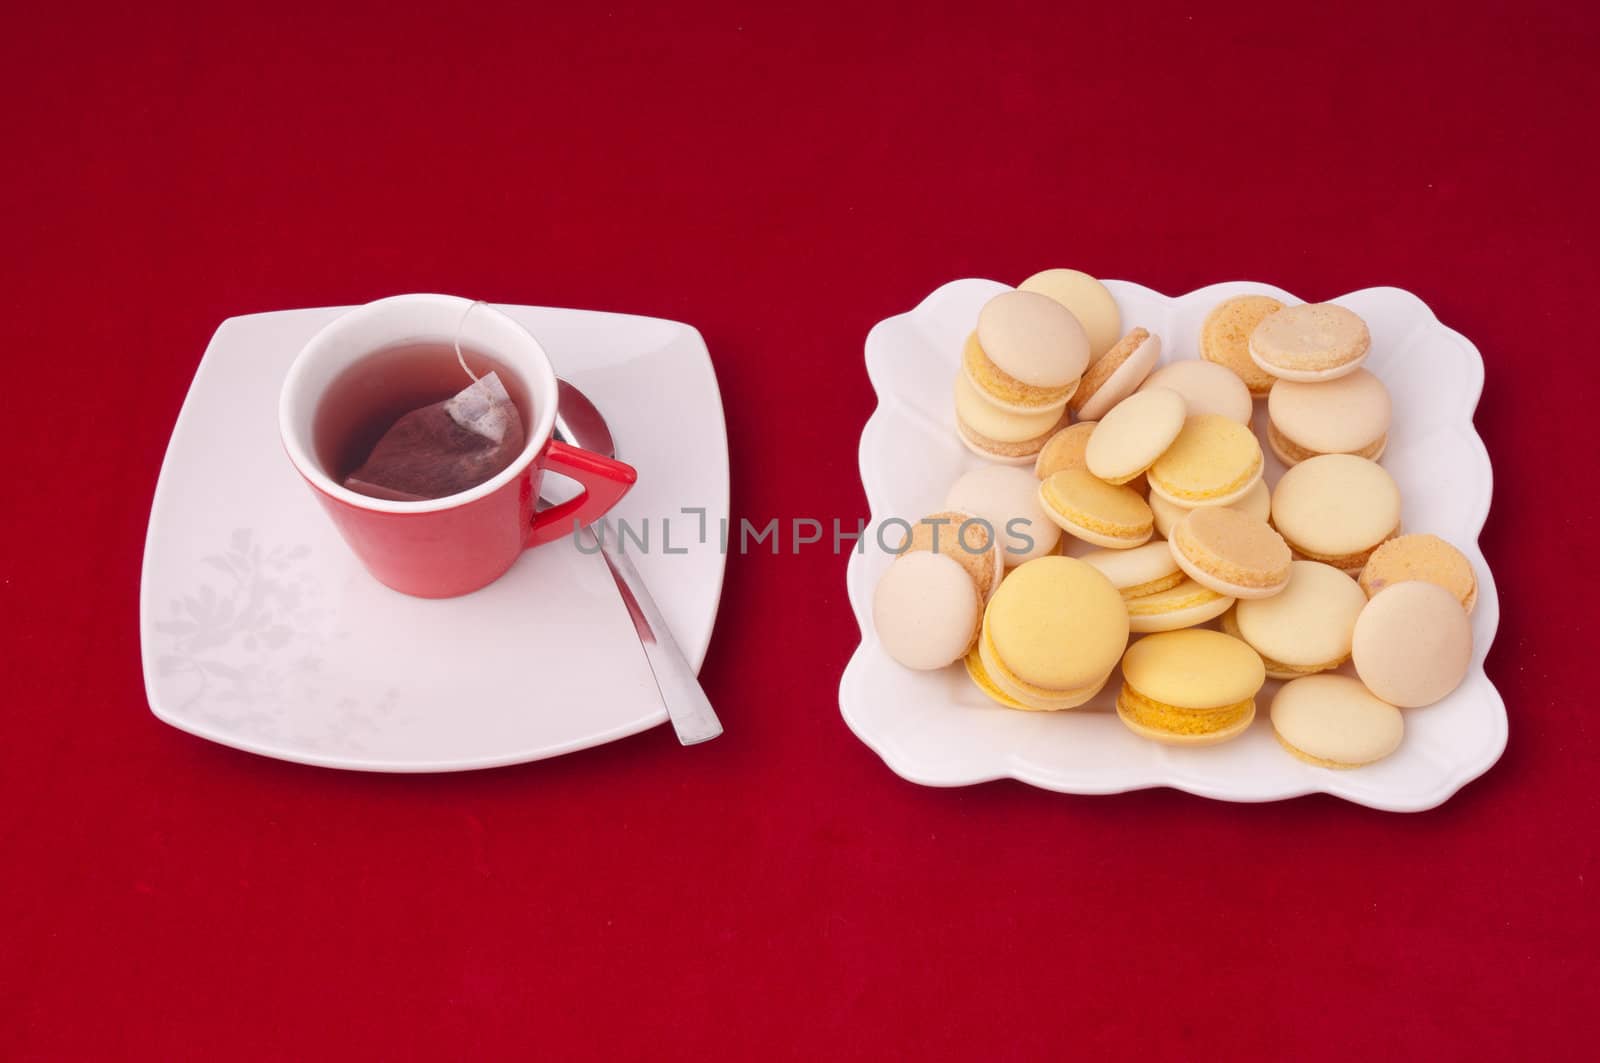 Cup of tea and plate of mixed macaroons on a velvet tablecloth